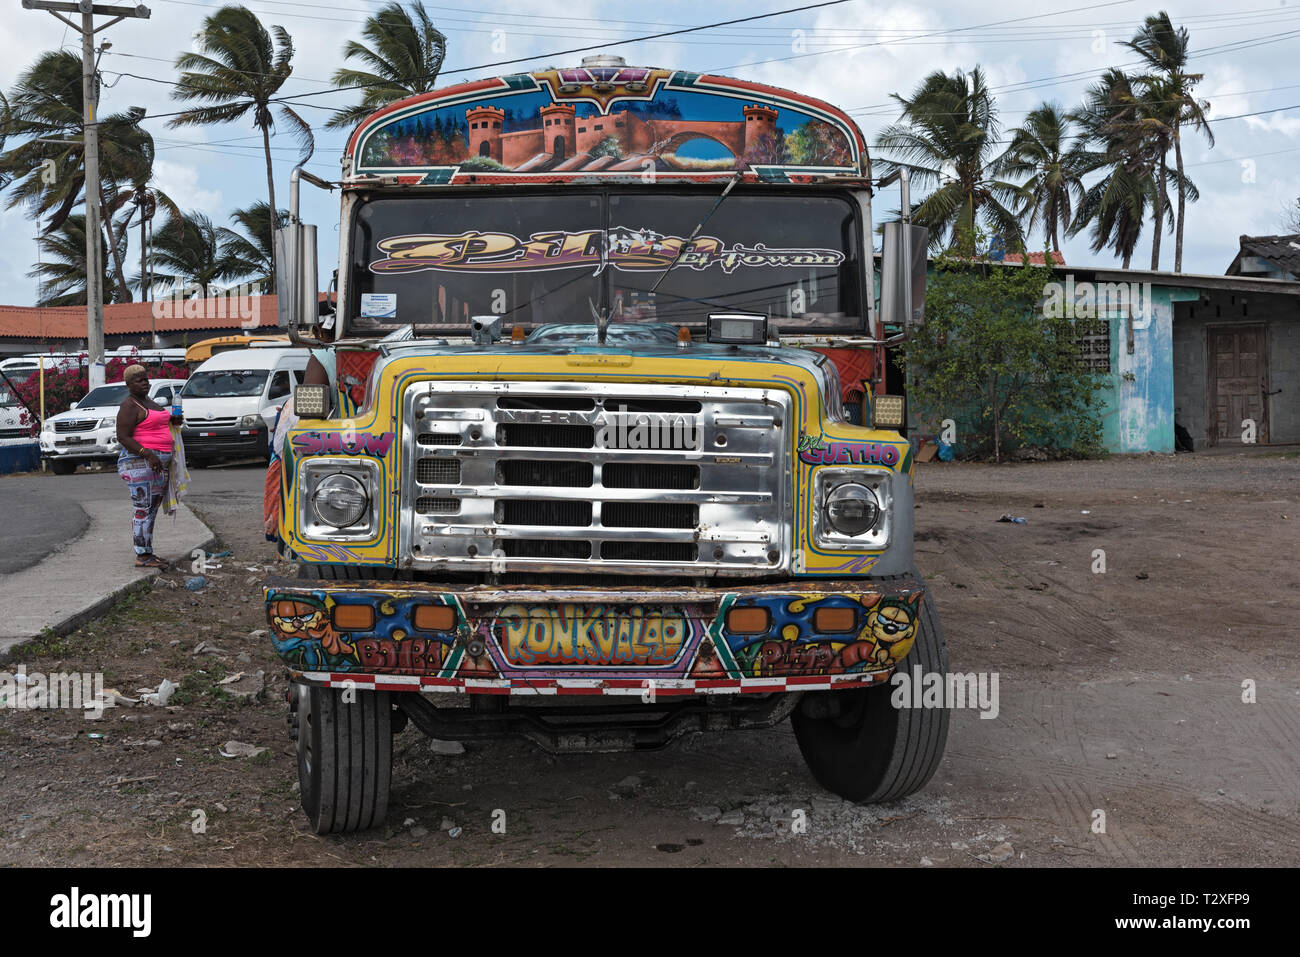 colorful painted chicken bus in puerto lindo panama Stock Photo